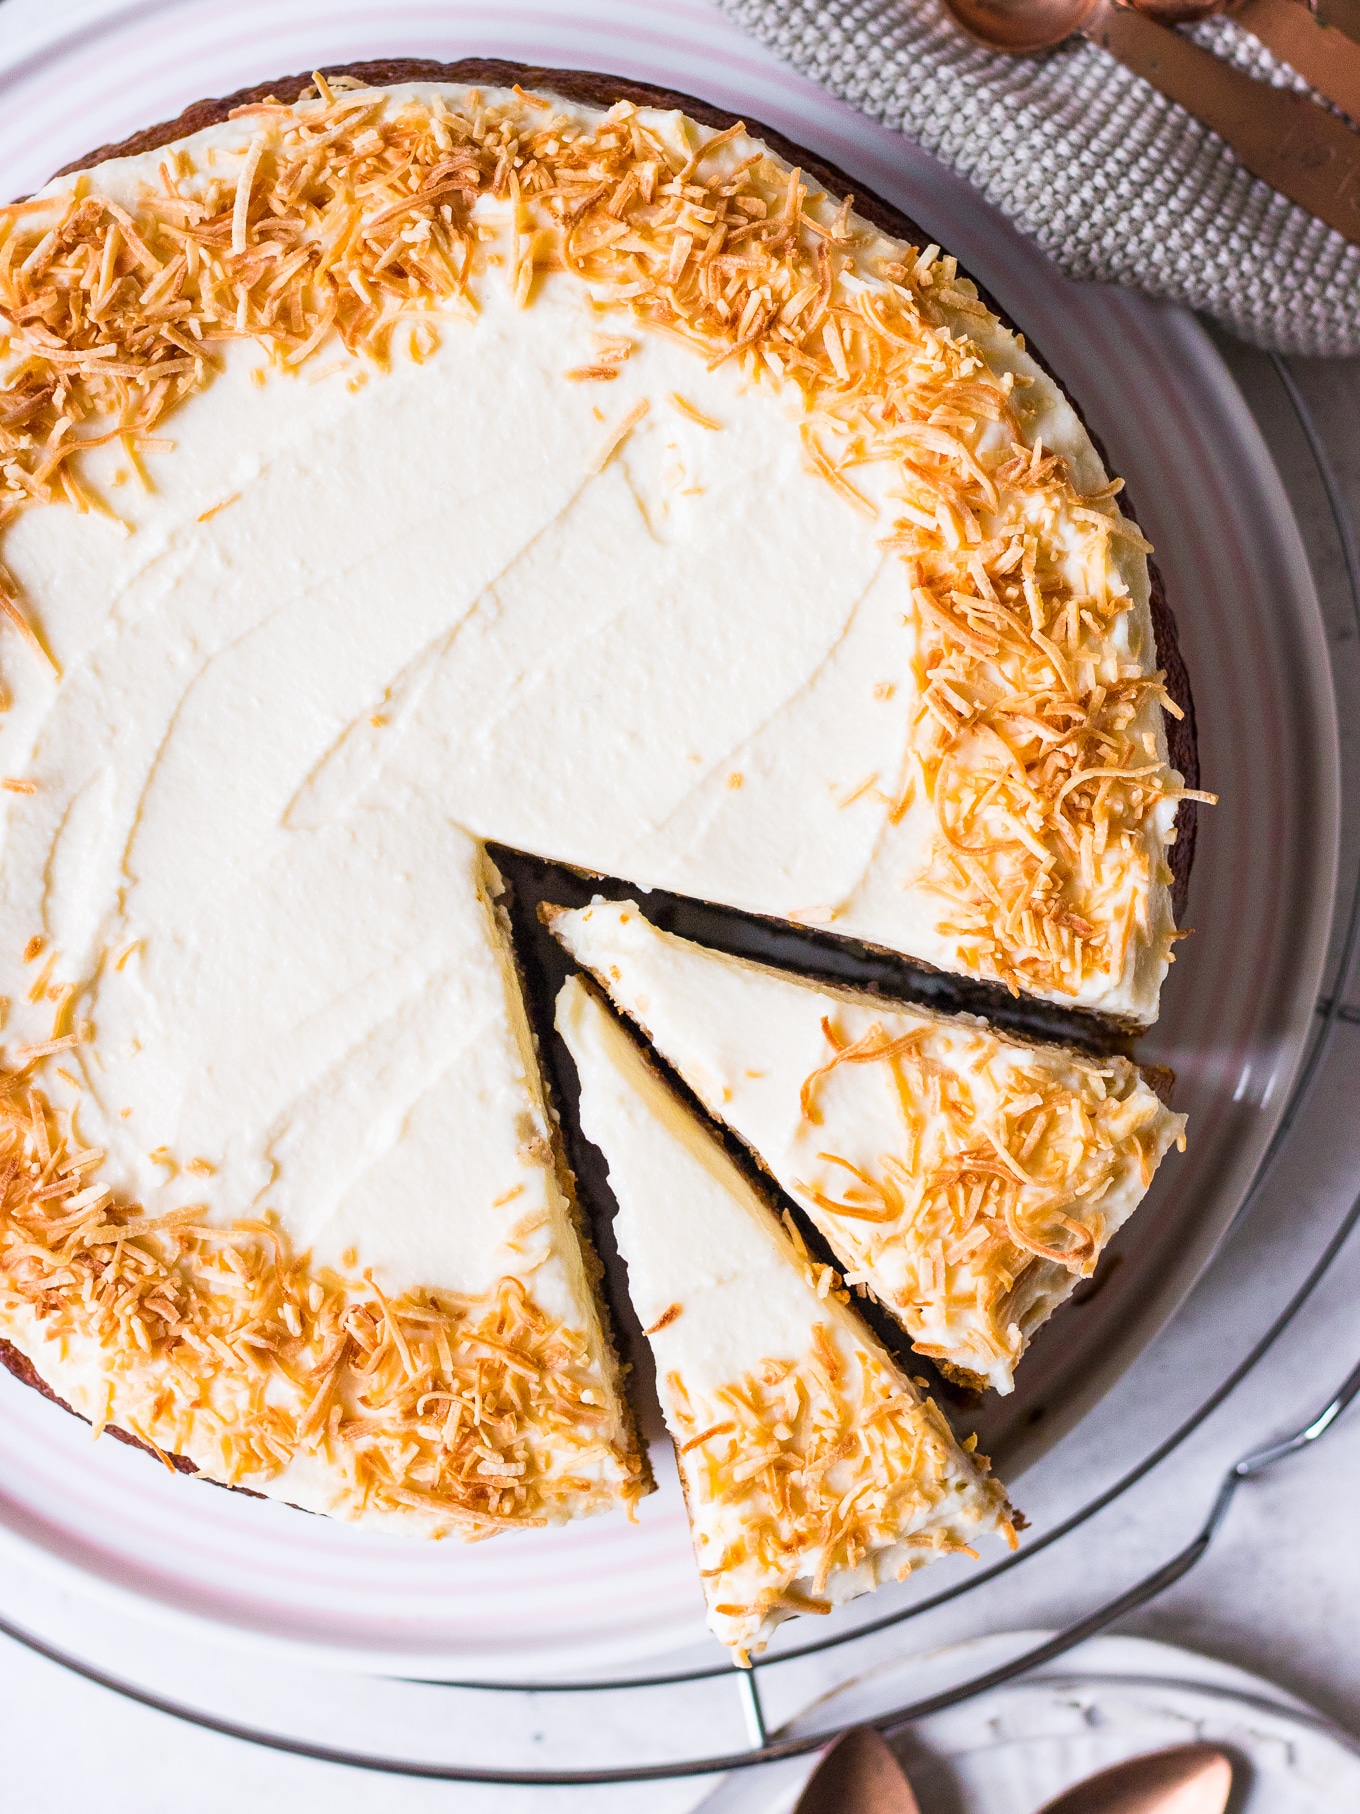 Top view of wholesome hummingbird cake with shredded coconut